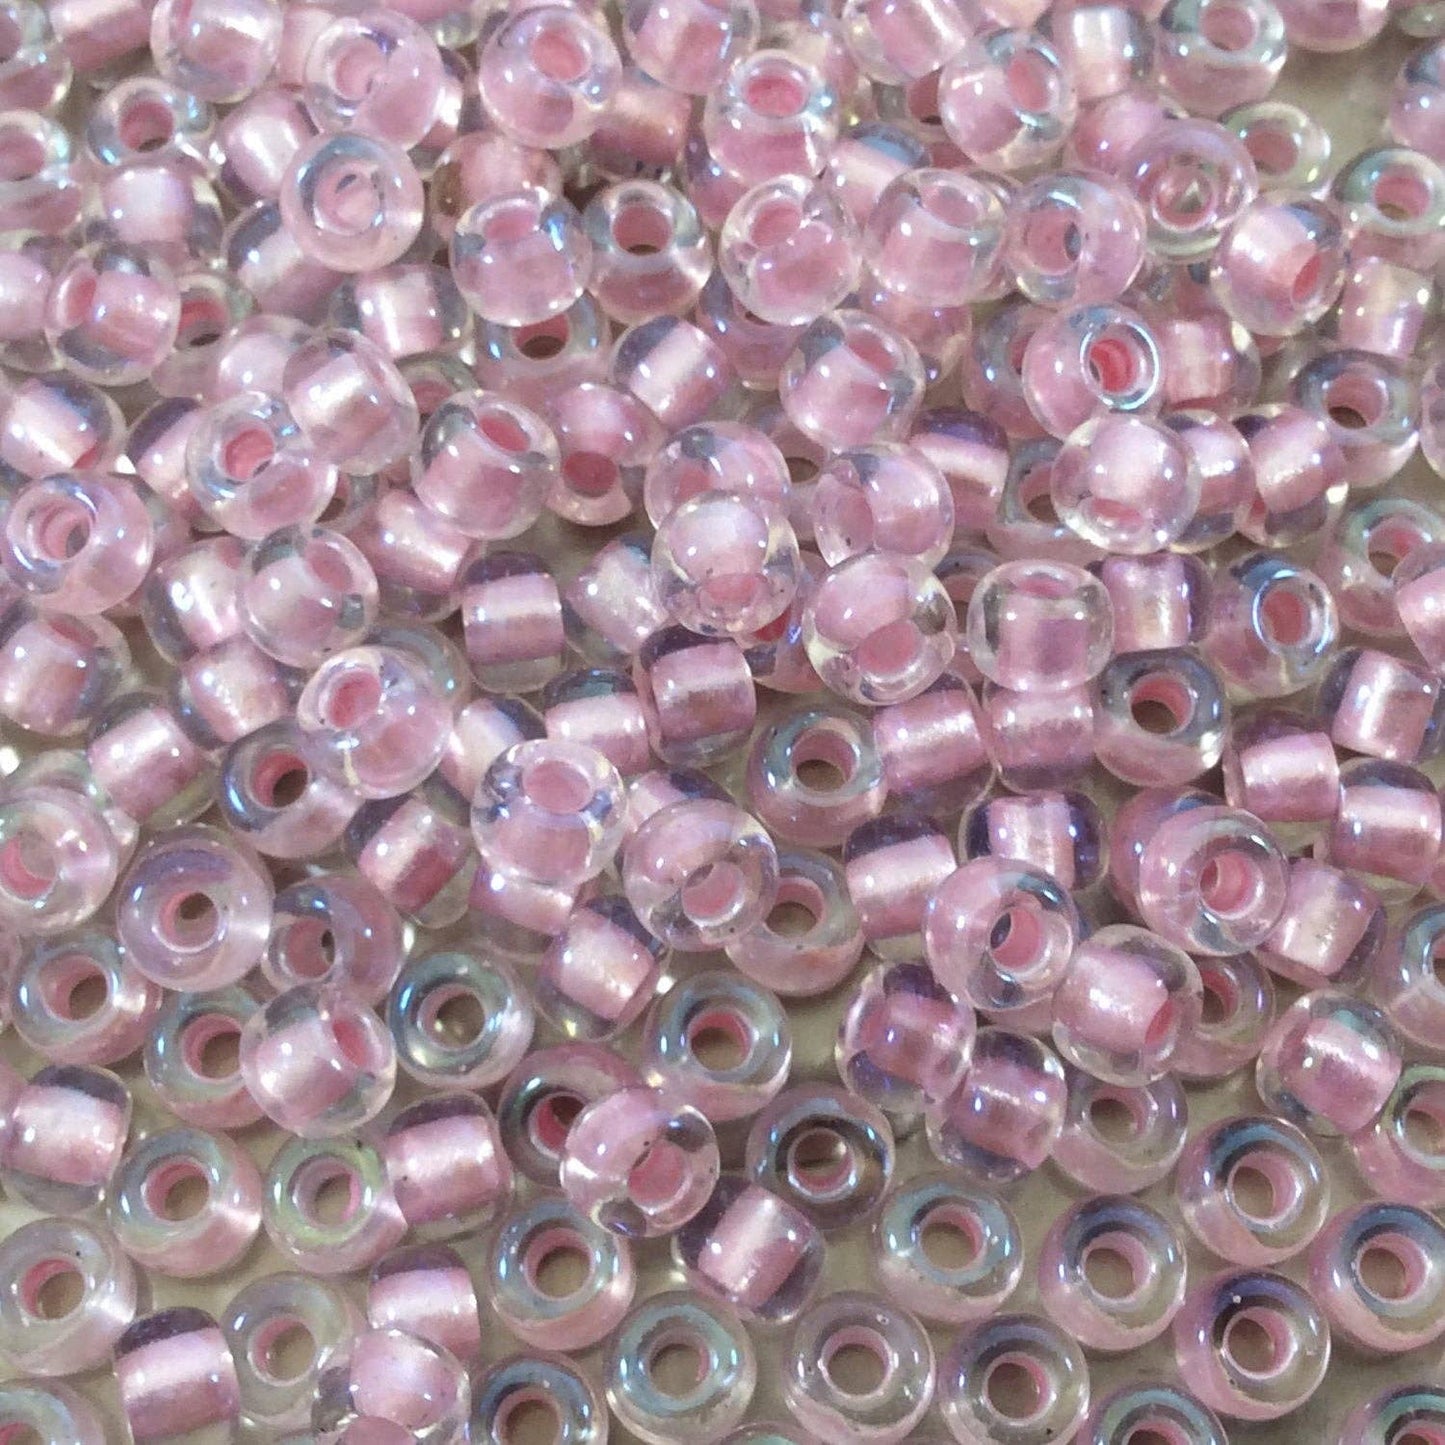 Size 6/0 Glossy AB Finish Pearlized Pink/Clear Genuine Miyuki Glass Seed Beads - Sold by 20 Gram Tubes (Approx. 200 Beads/Tube) - (6-93639)